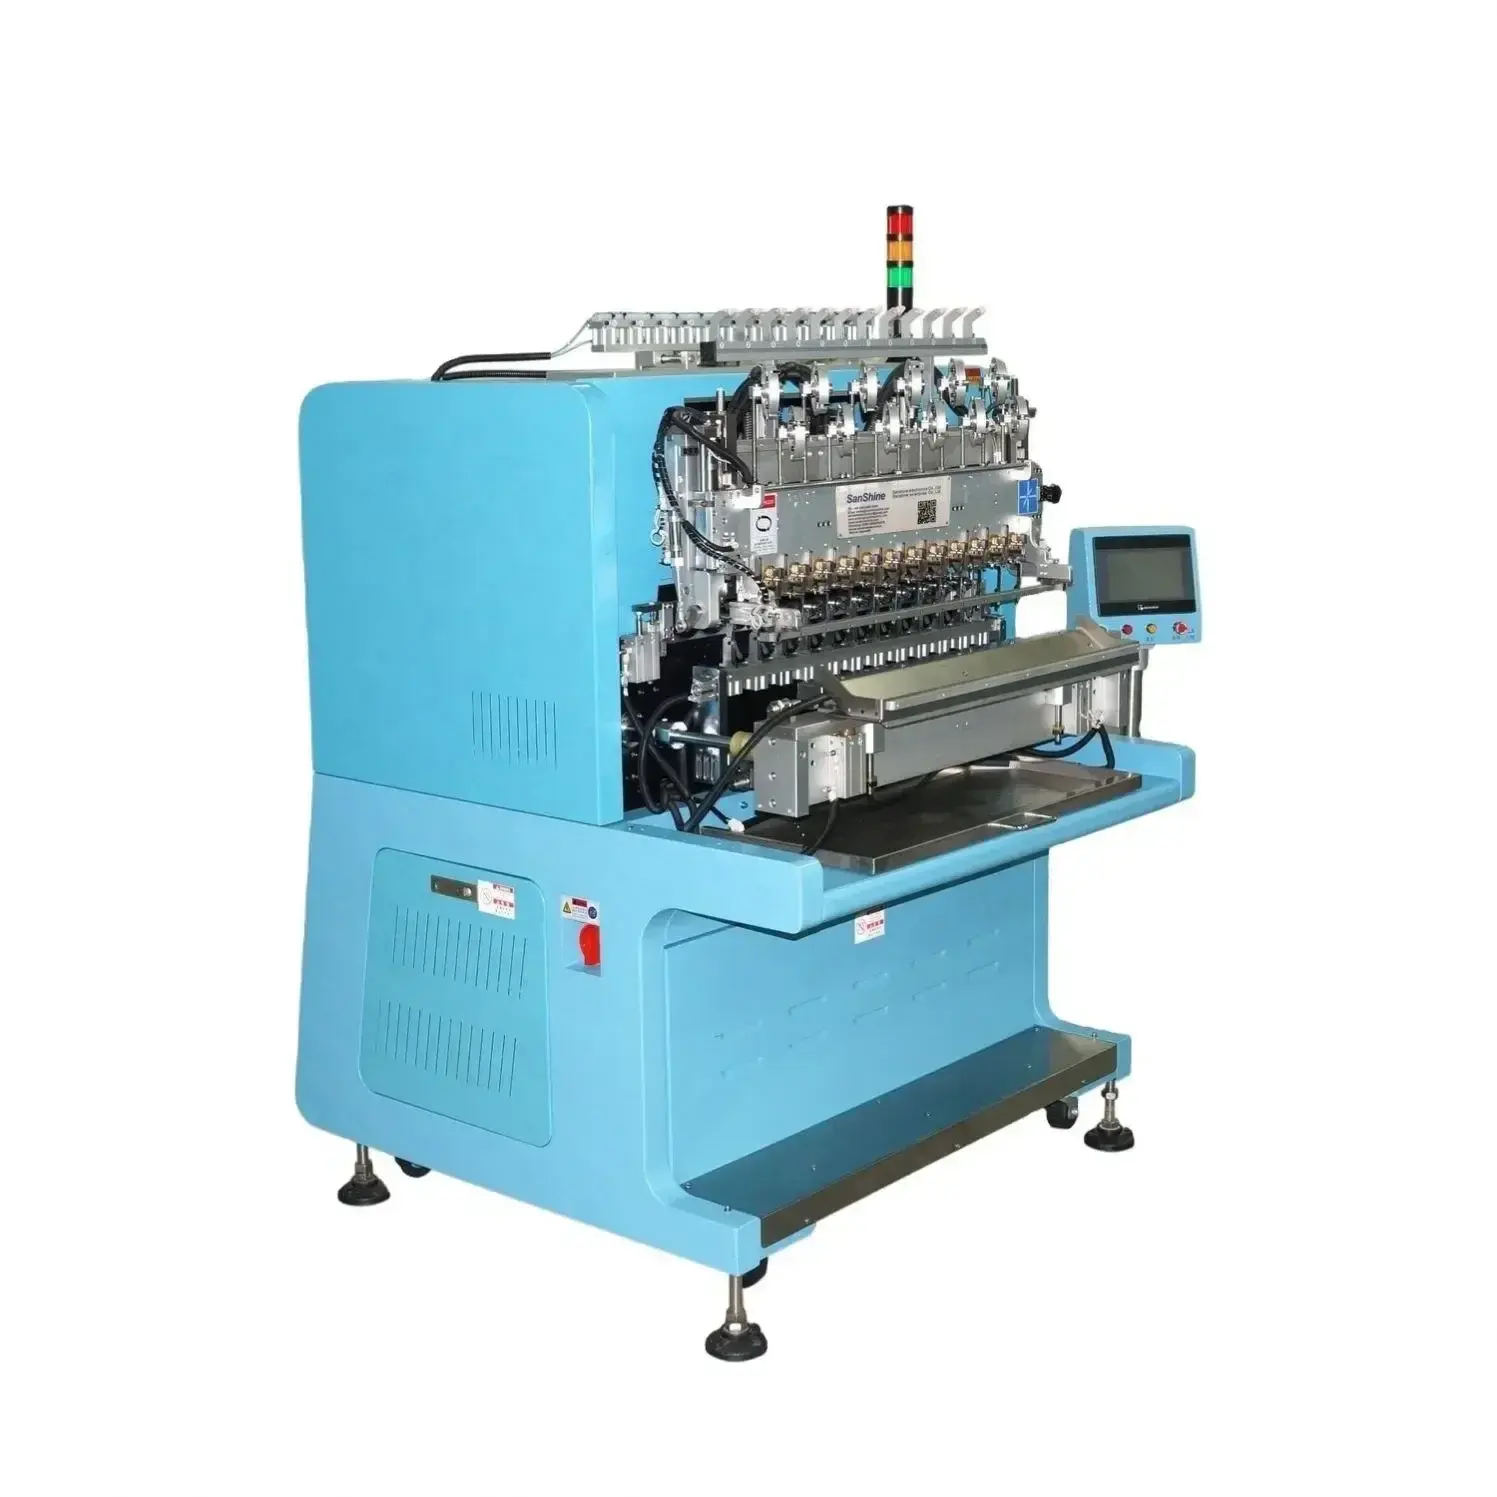 High frequency transformer winding machine special for transformer inductor coil winding and torsion ribbon